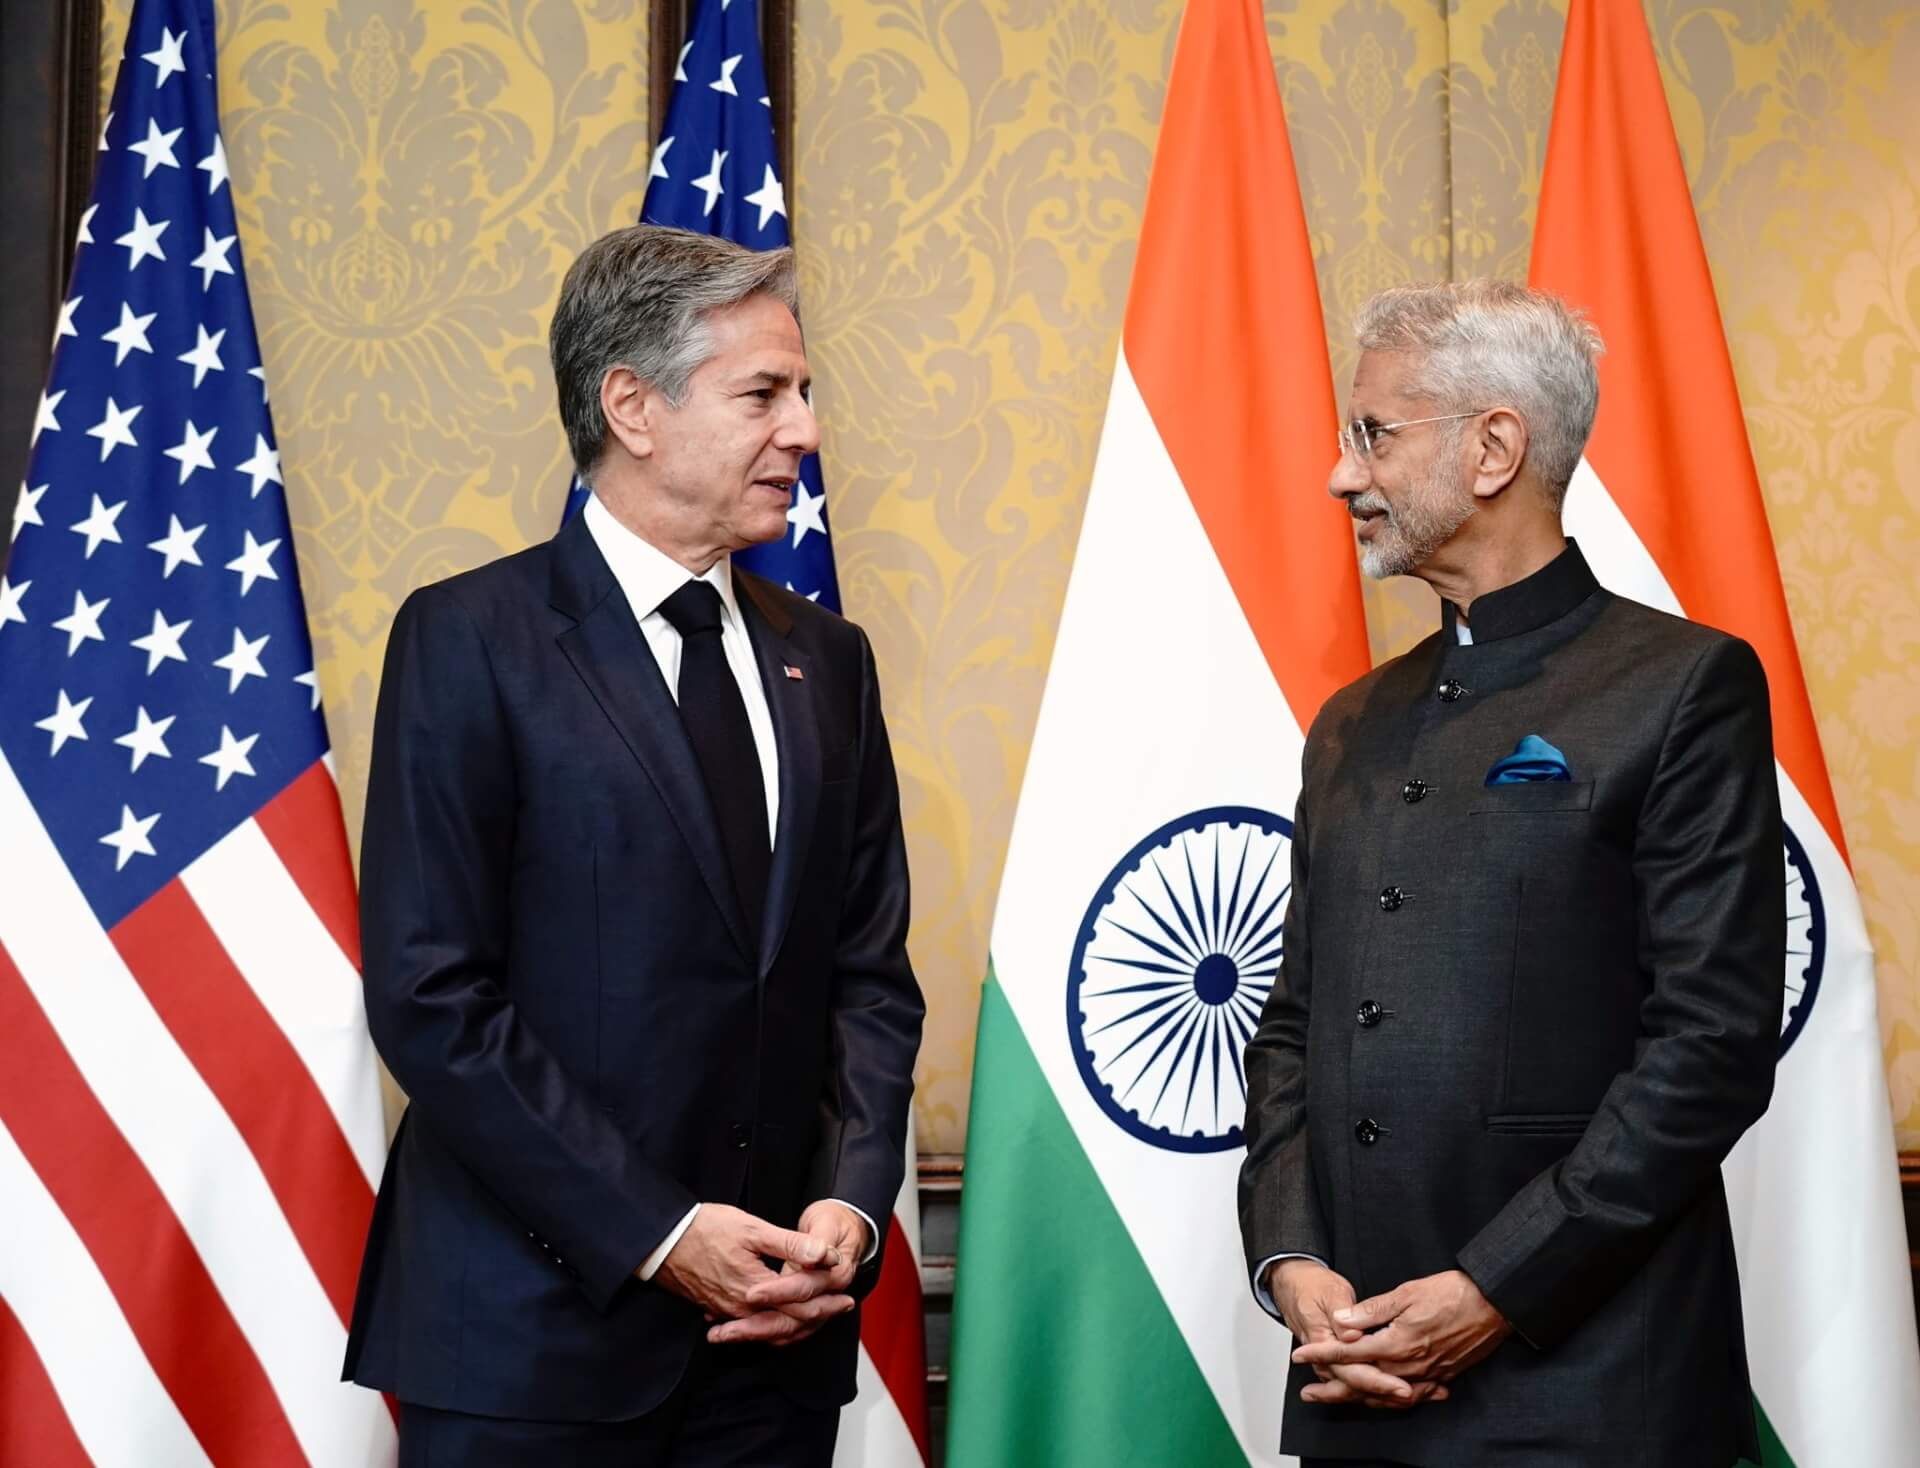 US “Deepened” Partnership with India via Quad, Common Challenges with China: Secretary Blinken